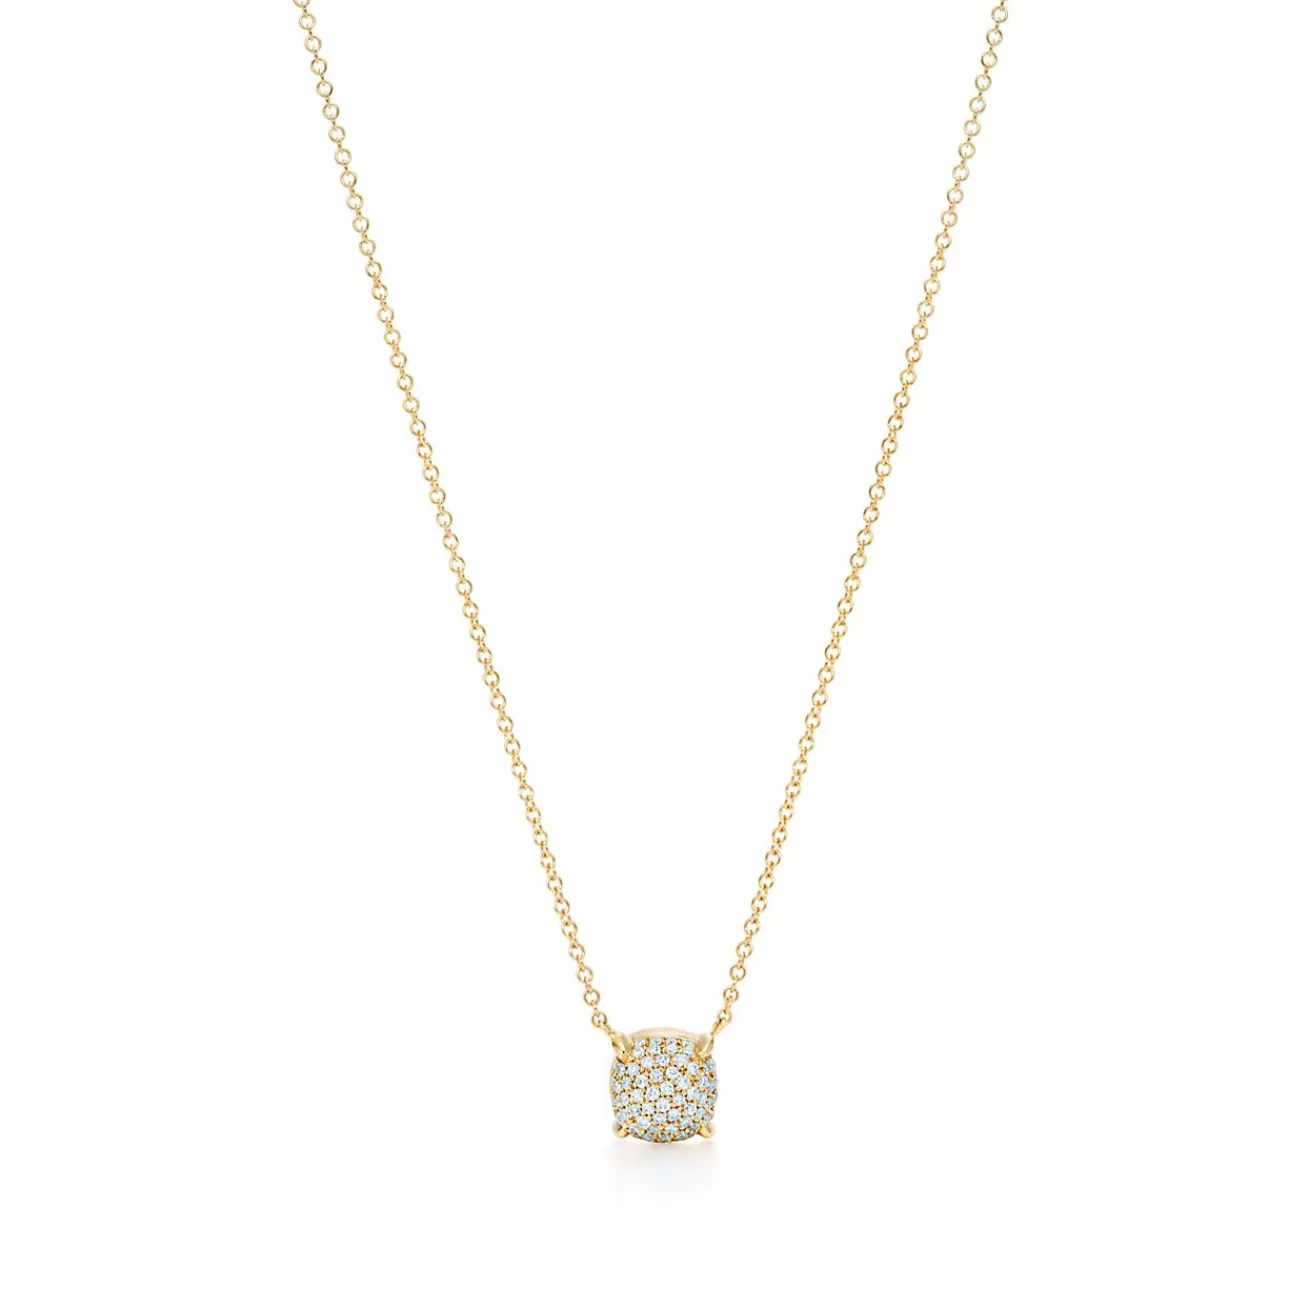 Tiffany & Co. Paloma's Sugar Stacks pendant in 18k gold with diamonds. | ^ Necklaces & Pendants | Gold Jewelry